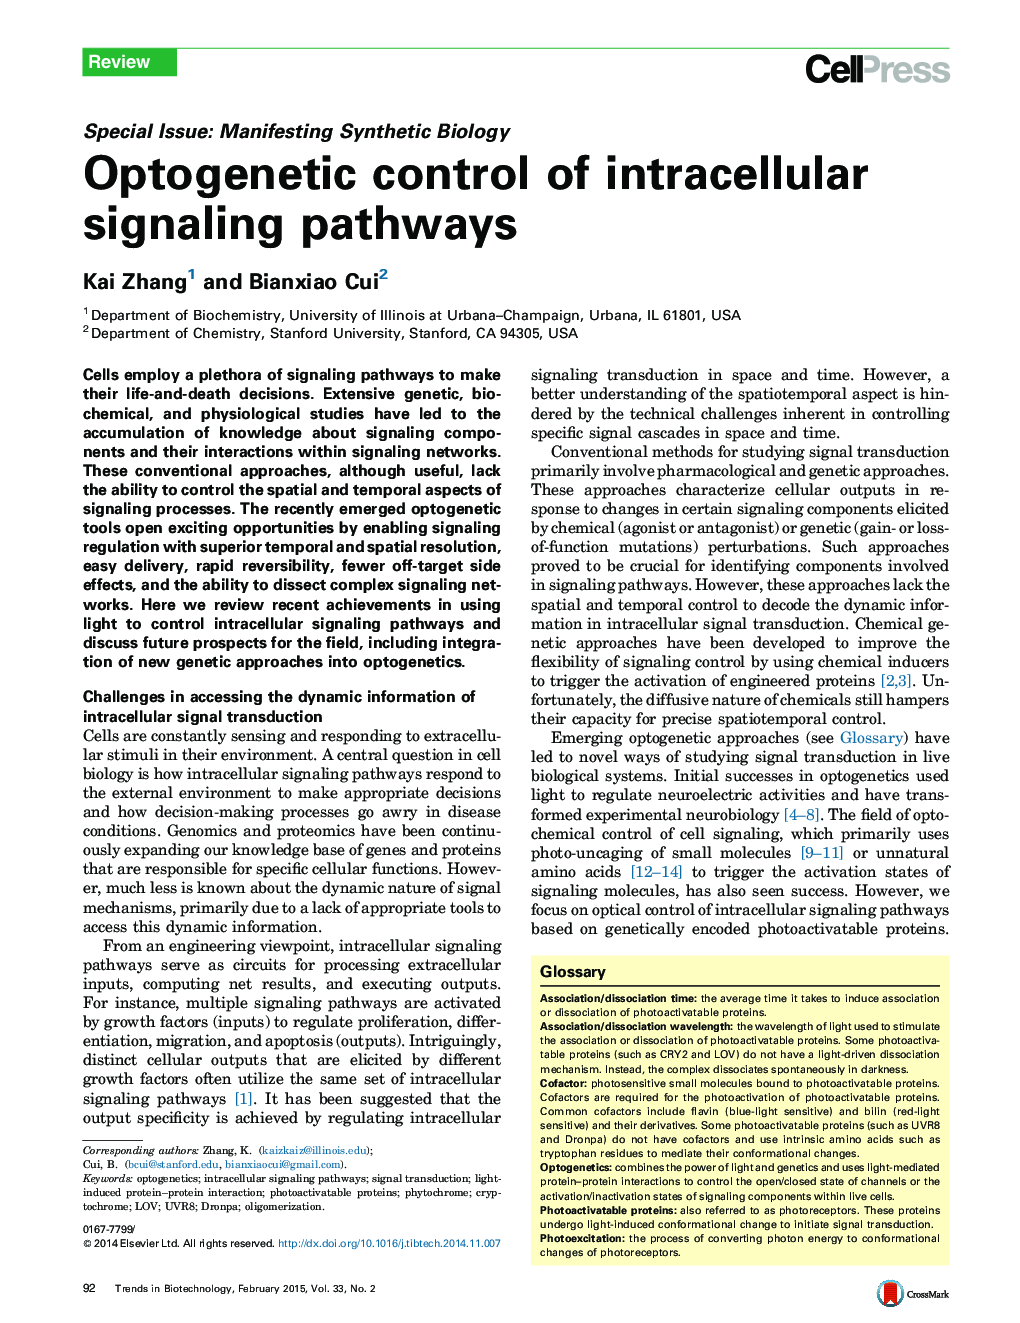 Optogenetic control of intracellular signaling pathways